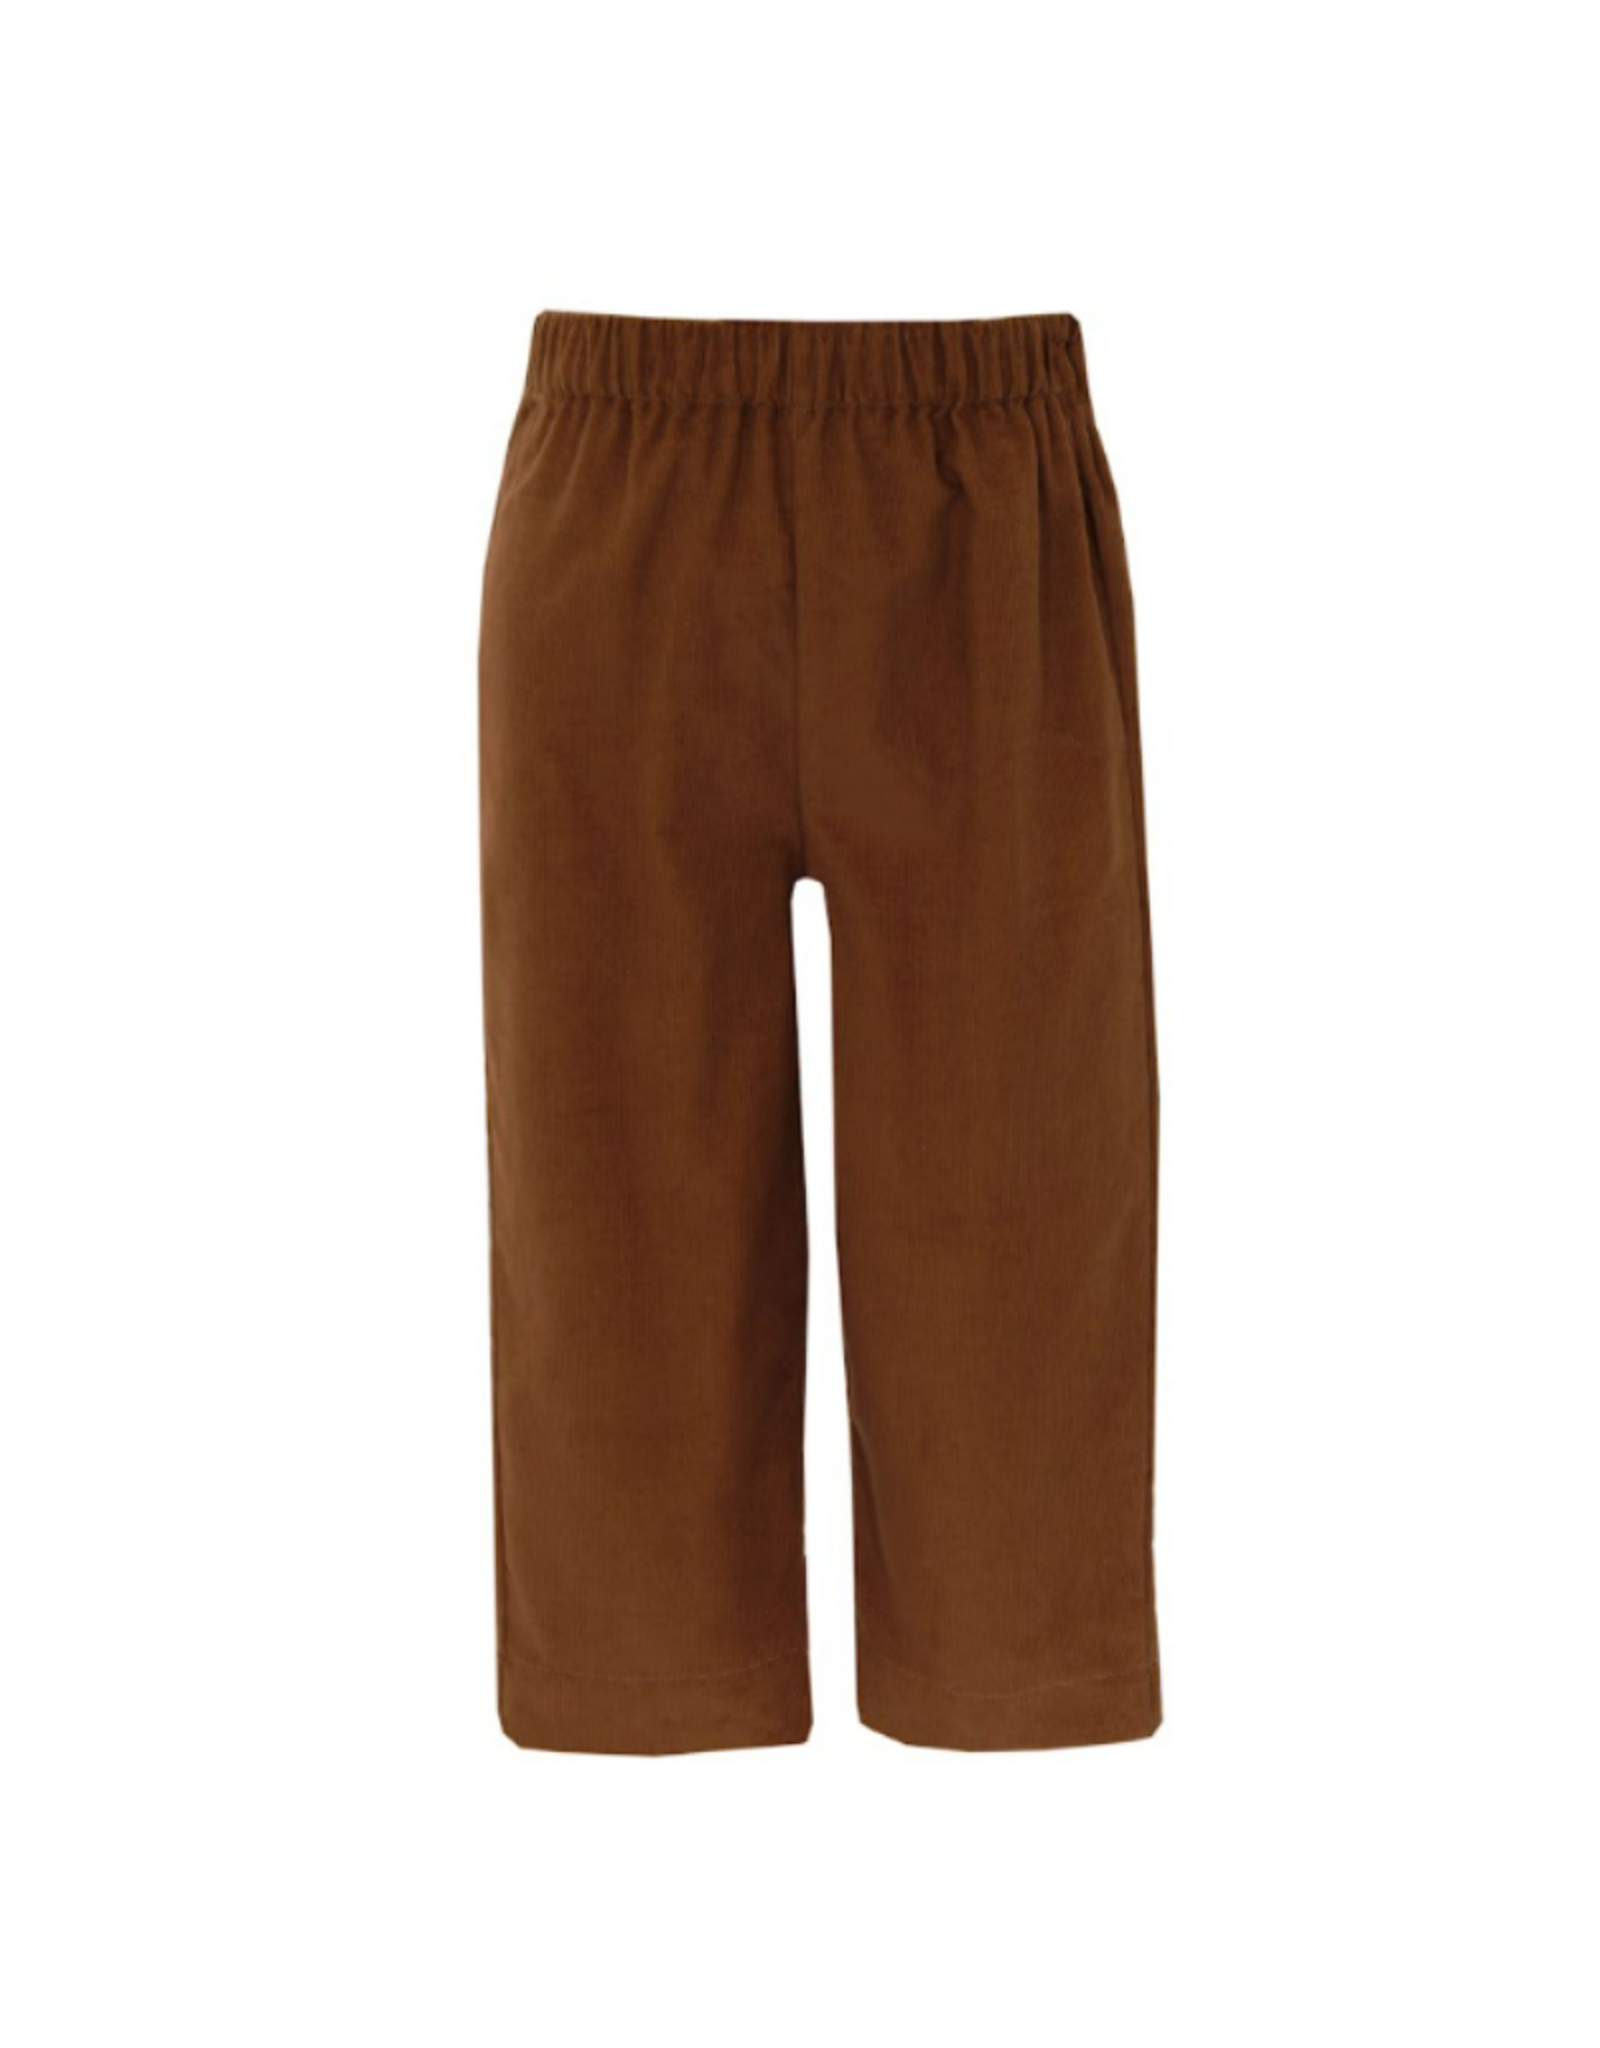 Claire and Charlie Brown Corduroy Boy's Pants